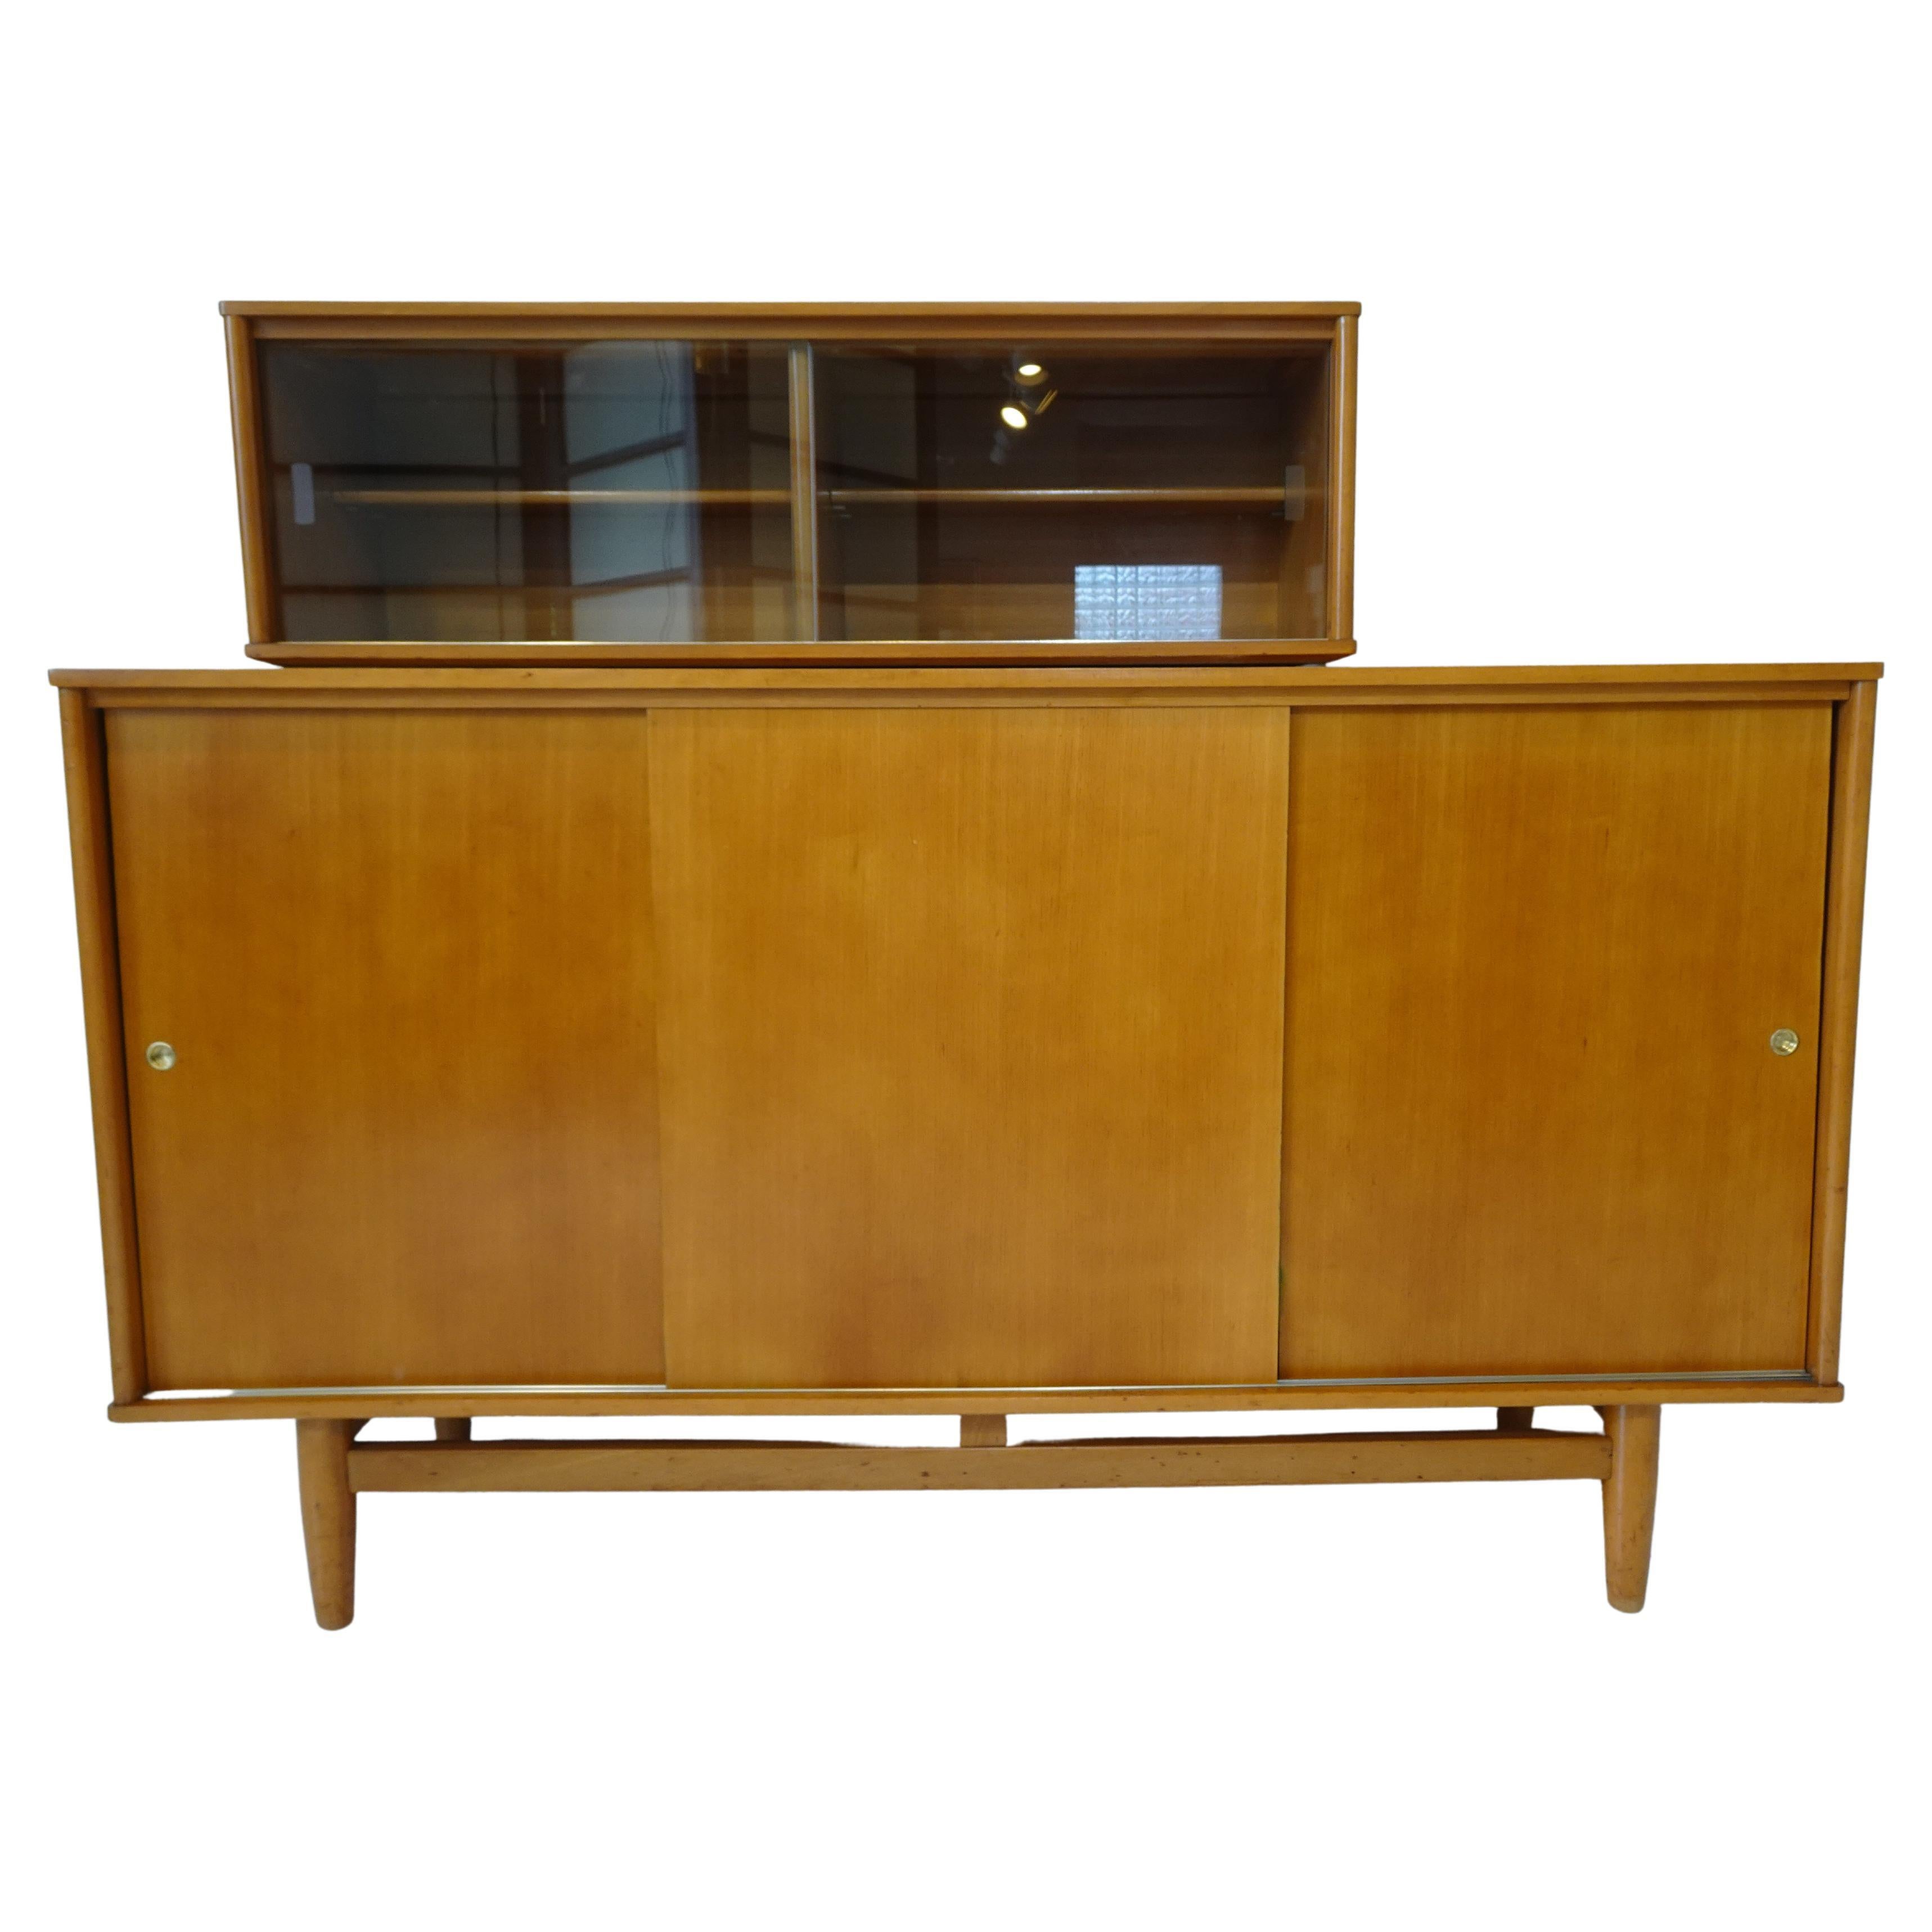 Early Milo Baughman Credenza / Sideboard for Drexel Todays Living